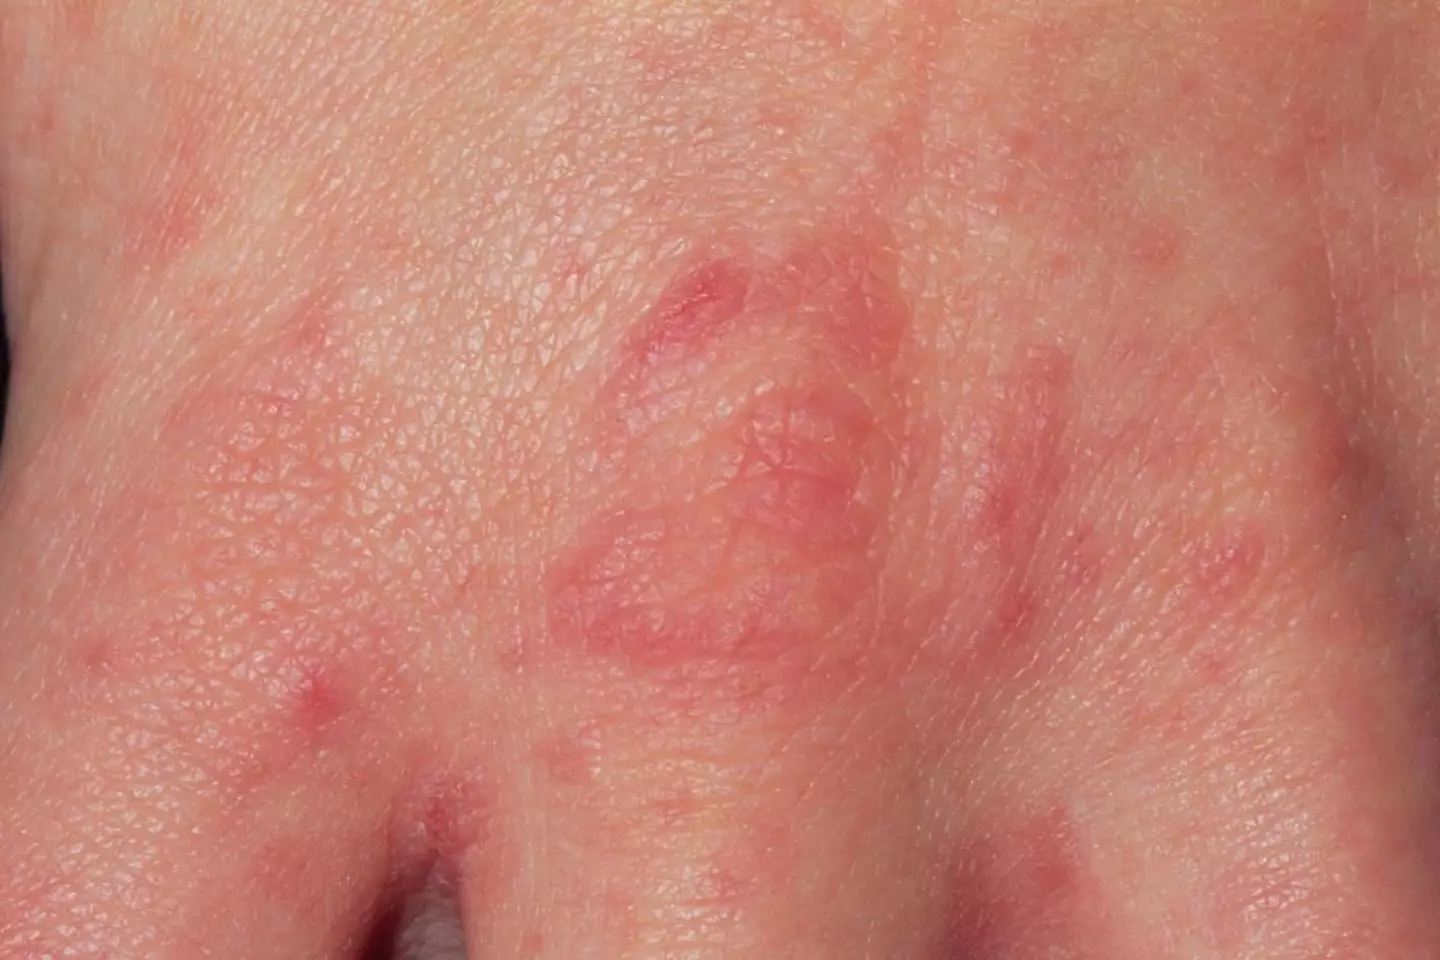 The rash can appear anywhere on the body.